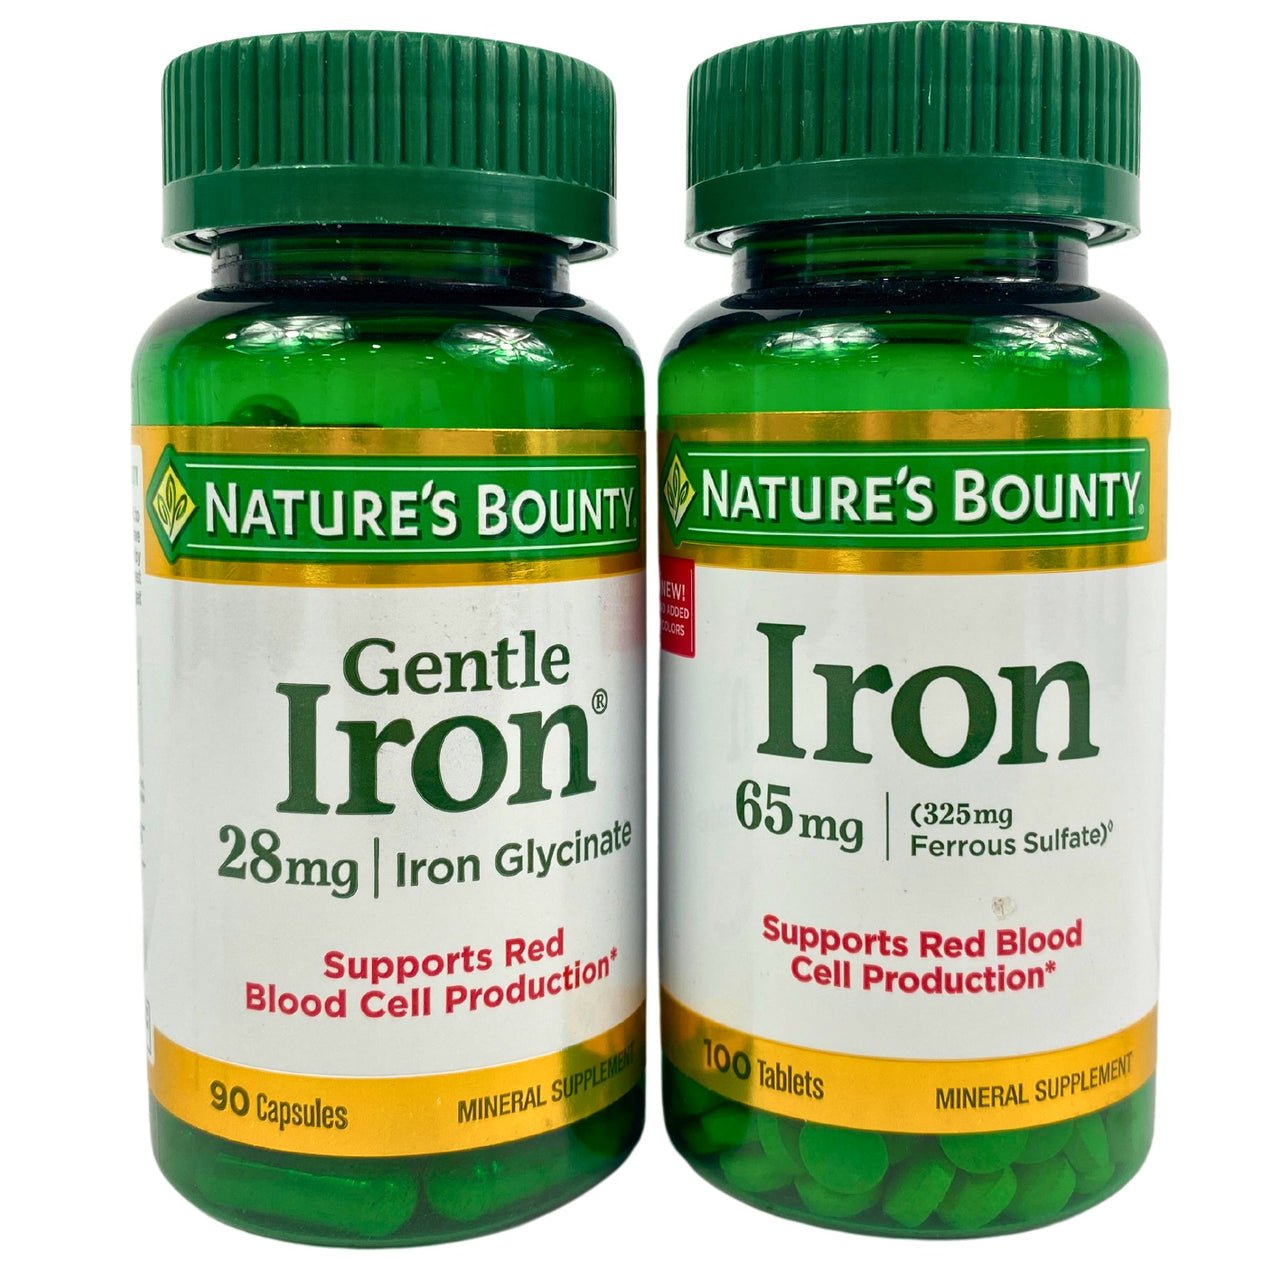 Nature's Bounty Gentle Iron & Iron Mineral Supplement Assorted Mix (40 Pcs Lot)